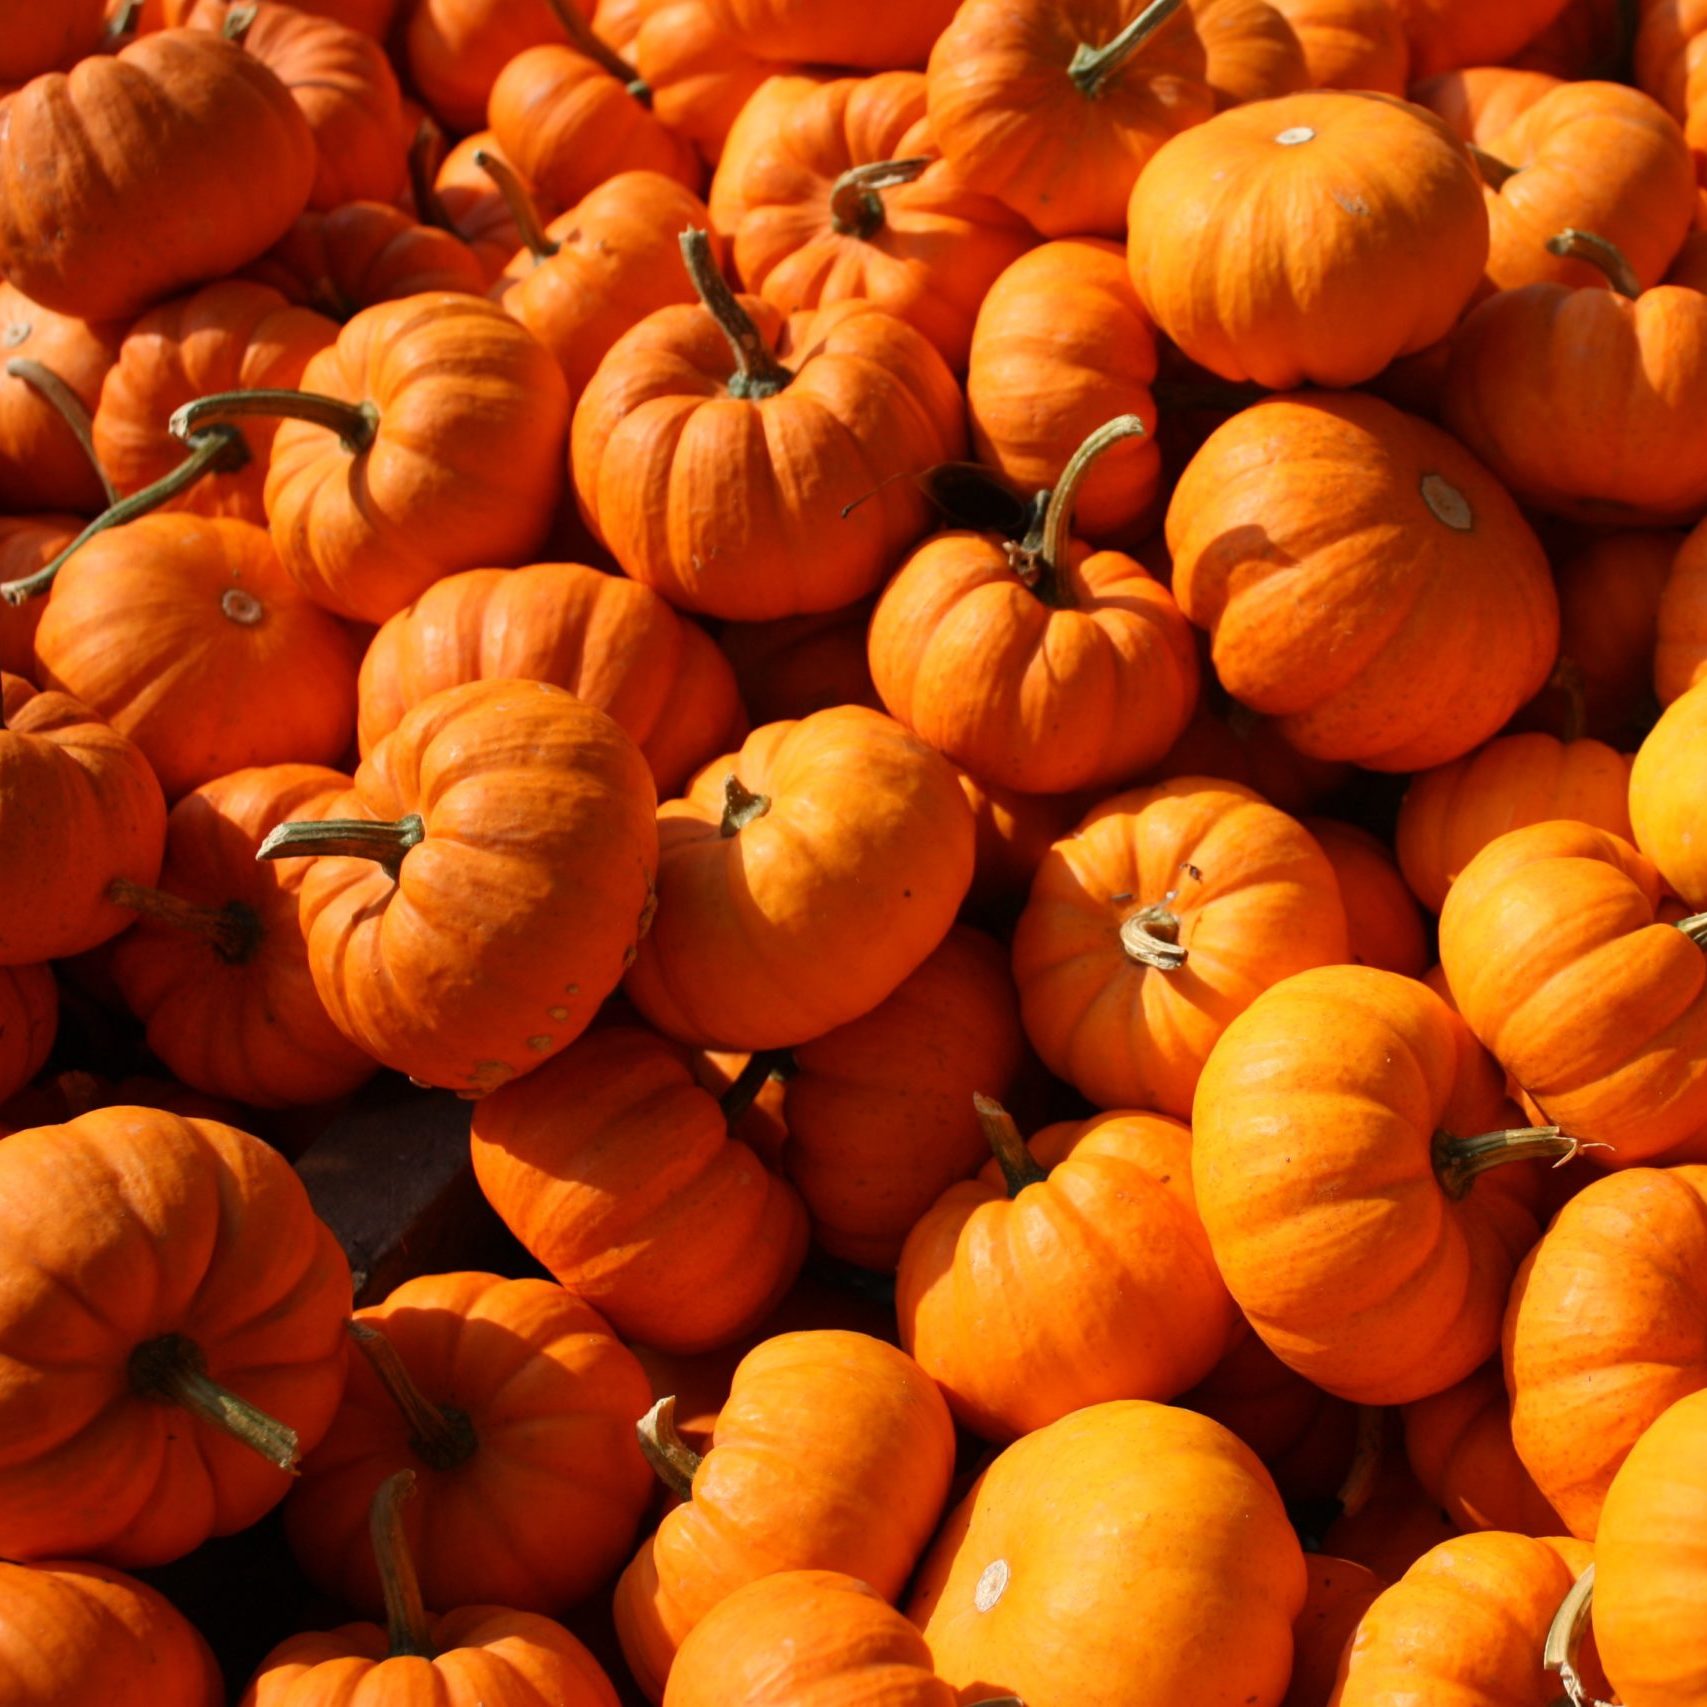 a jumbled group of bright orange pumpkins in the sunlight 